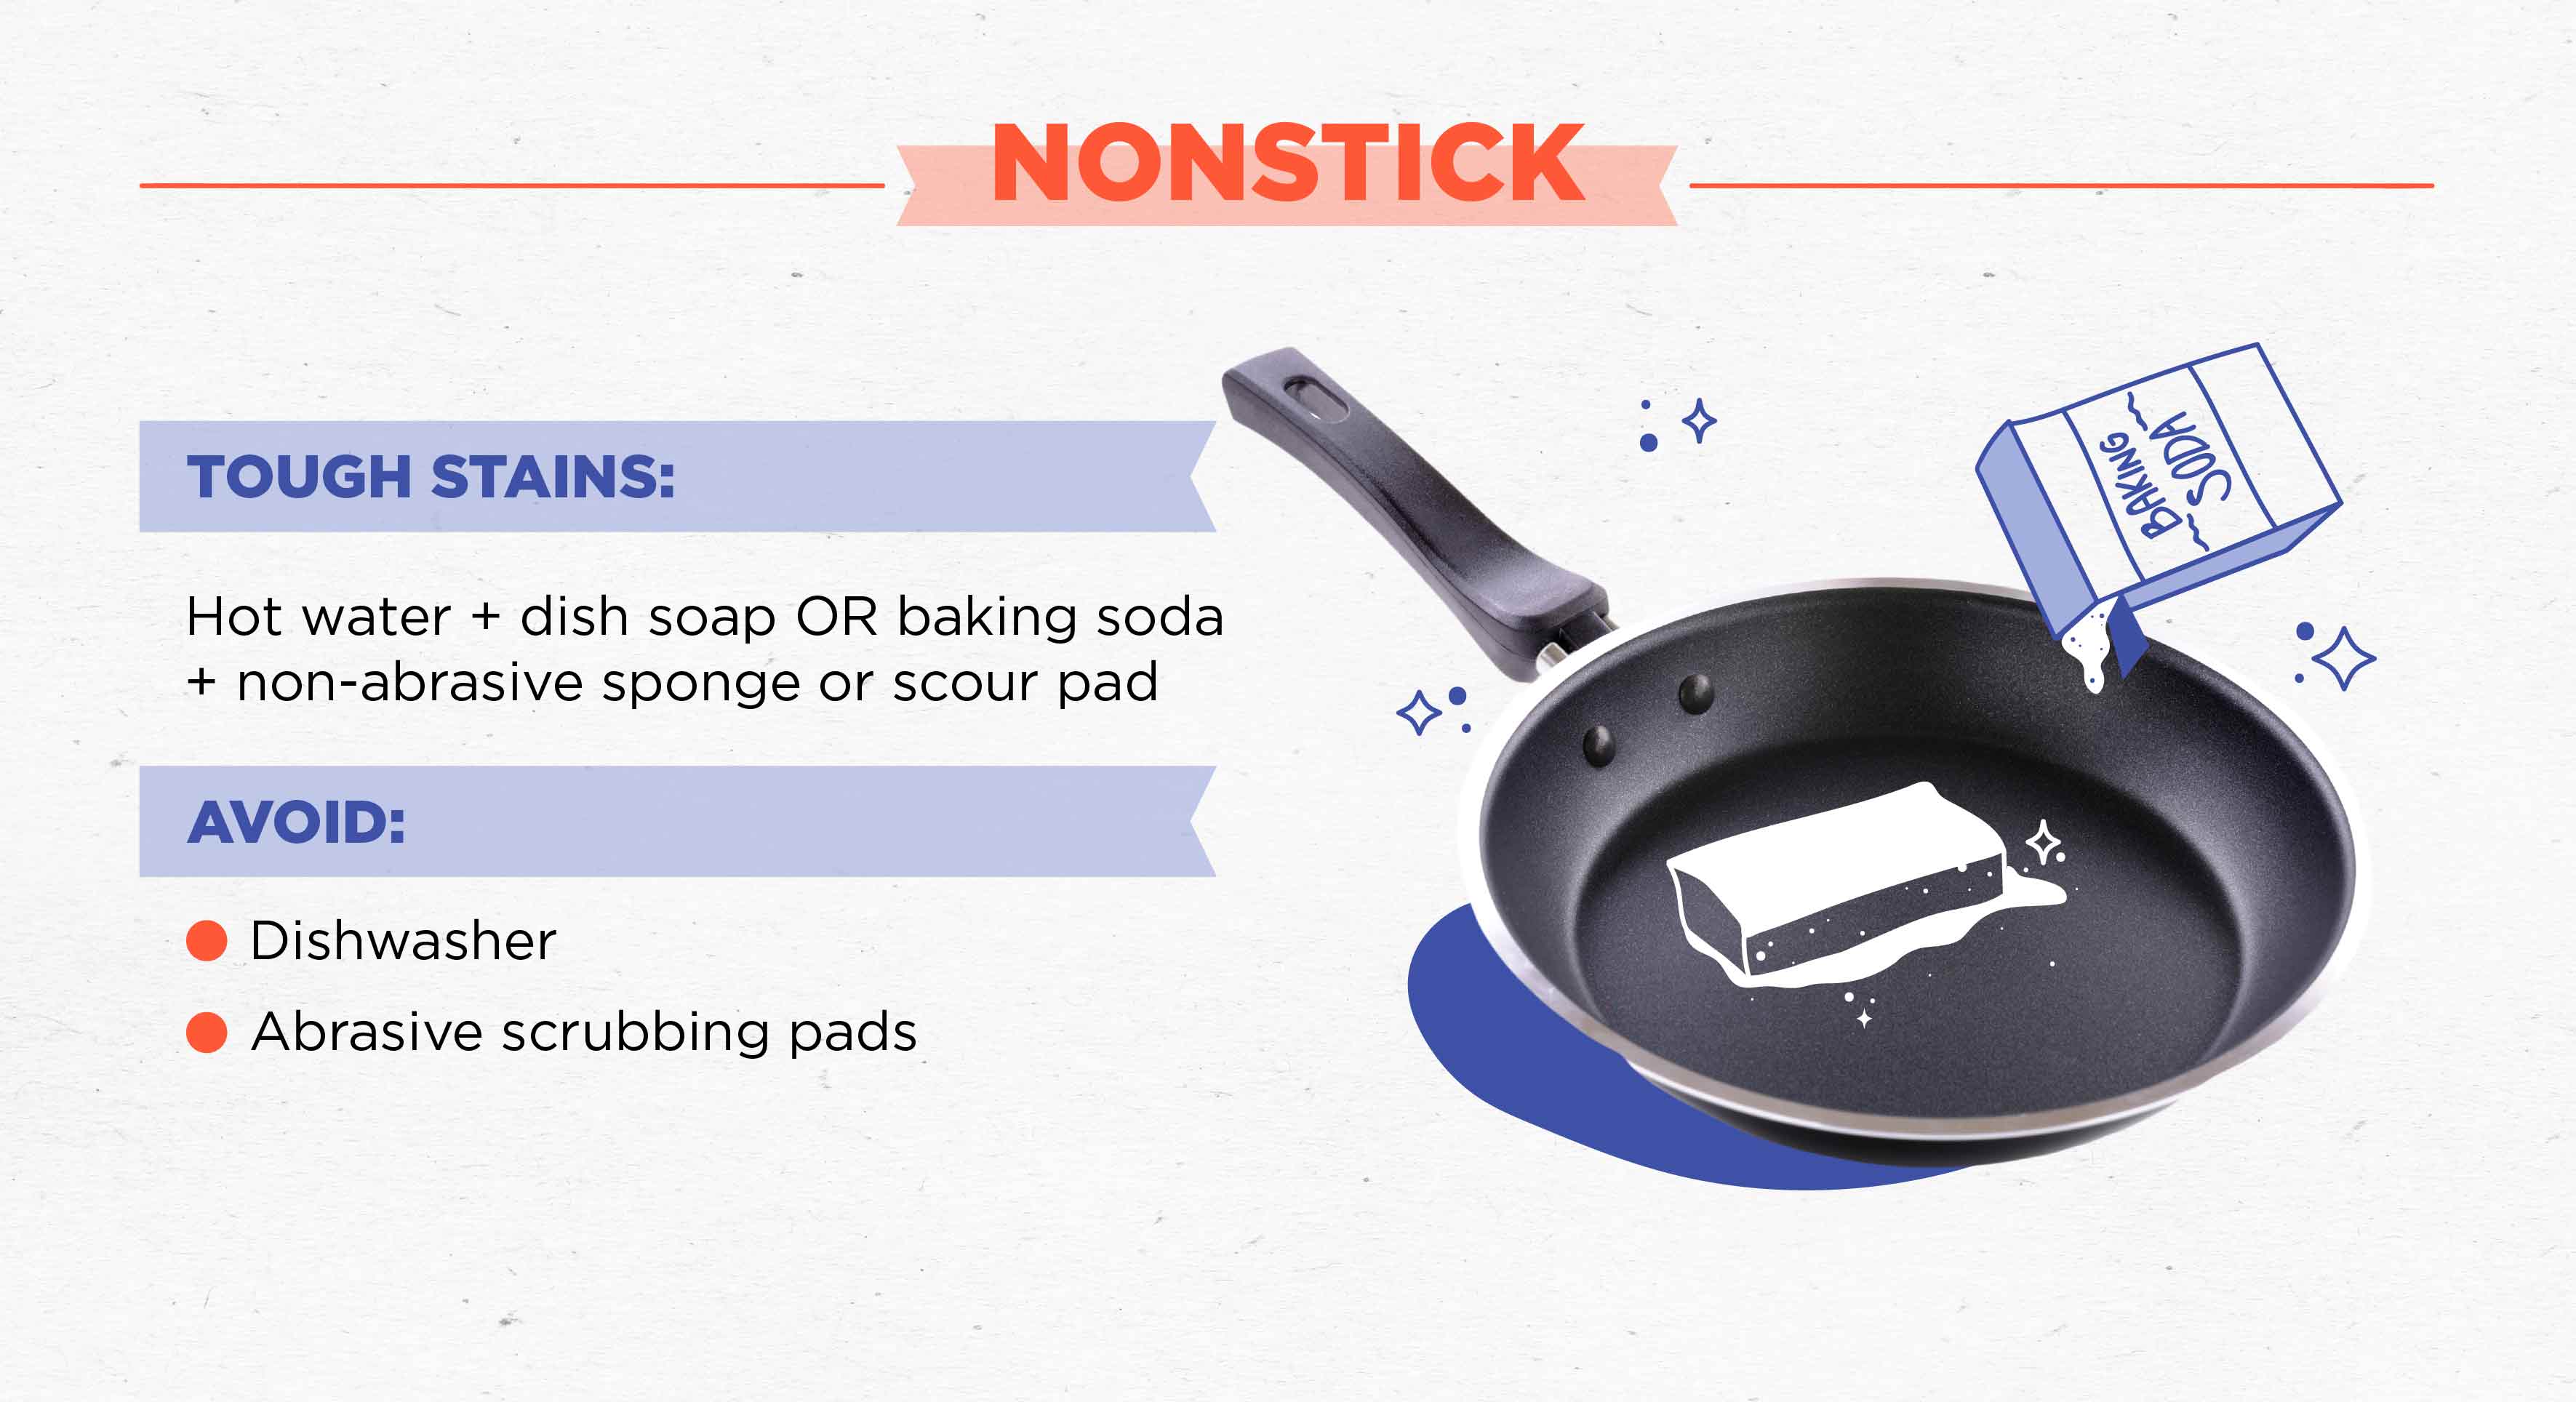 Nonstick pan with baking soda and sponge cleaning illustrations.